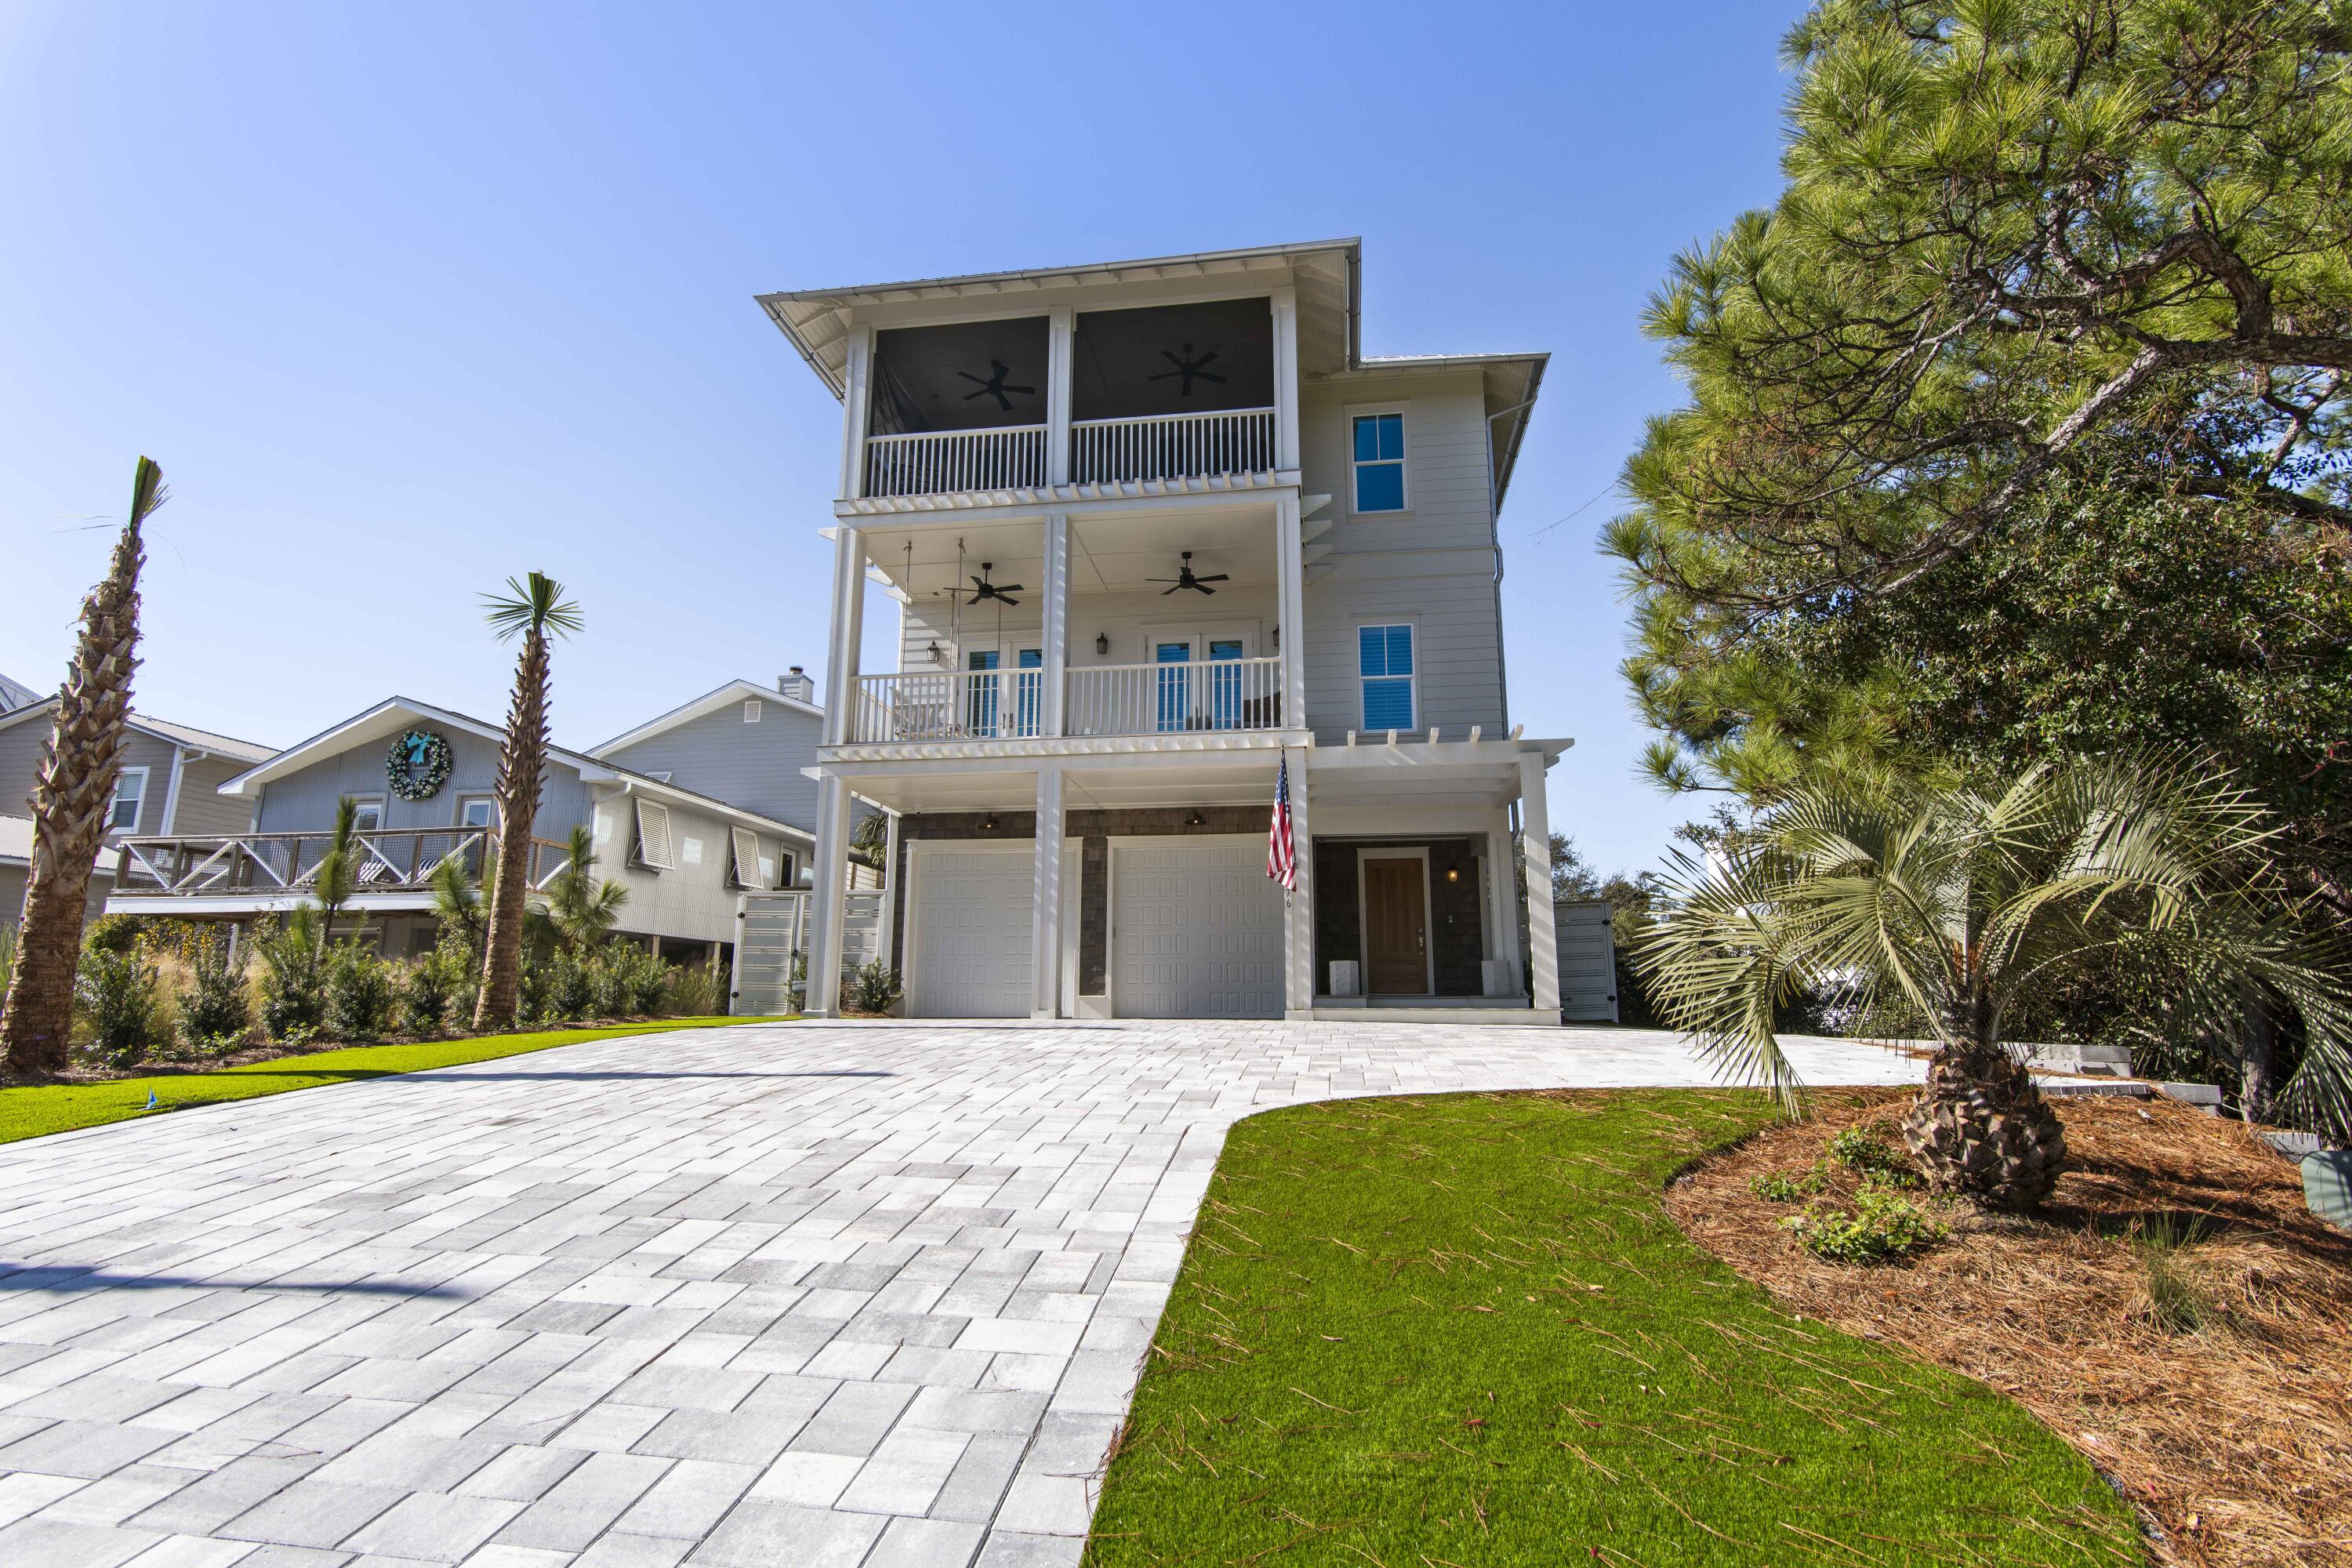 Homes for sale in Santa Rosa Beach | View 176 Magnolia Street | 5 Beds, 5 Baths